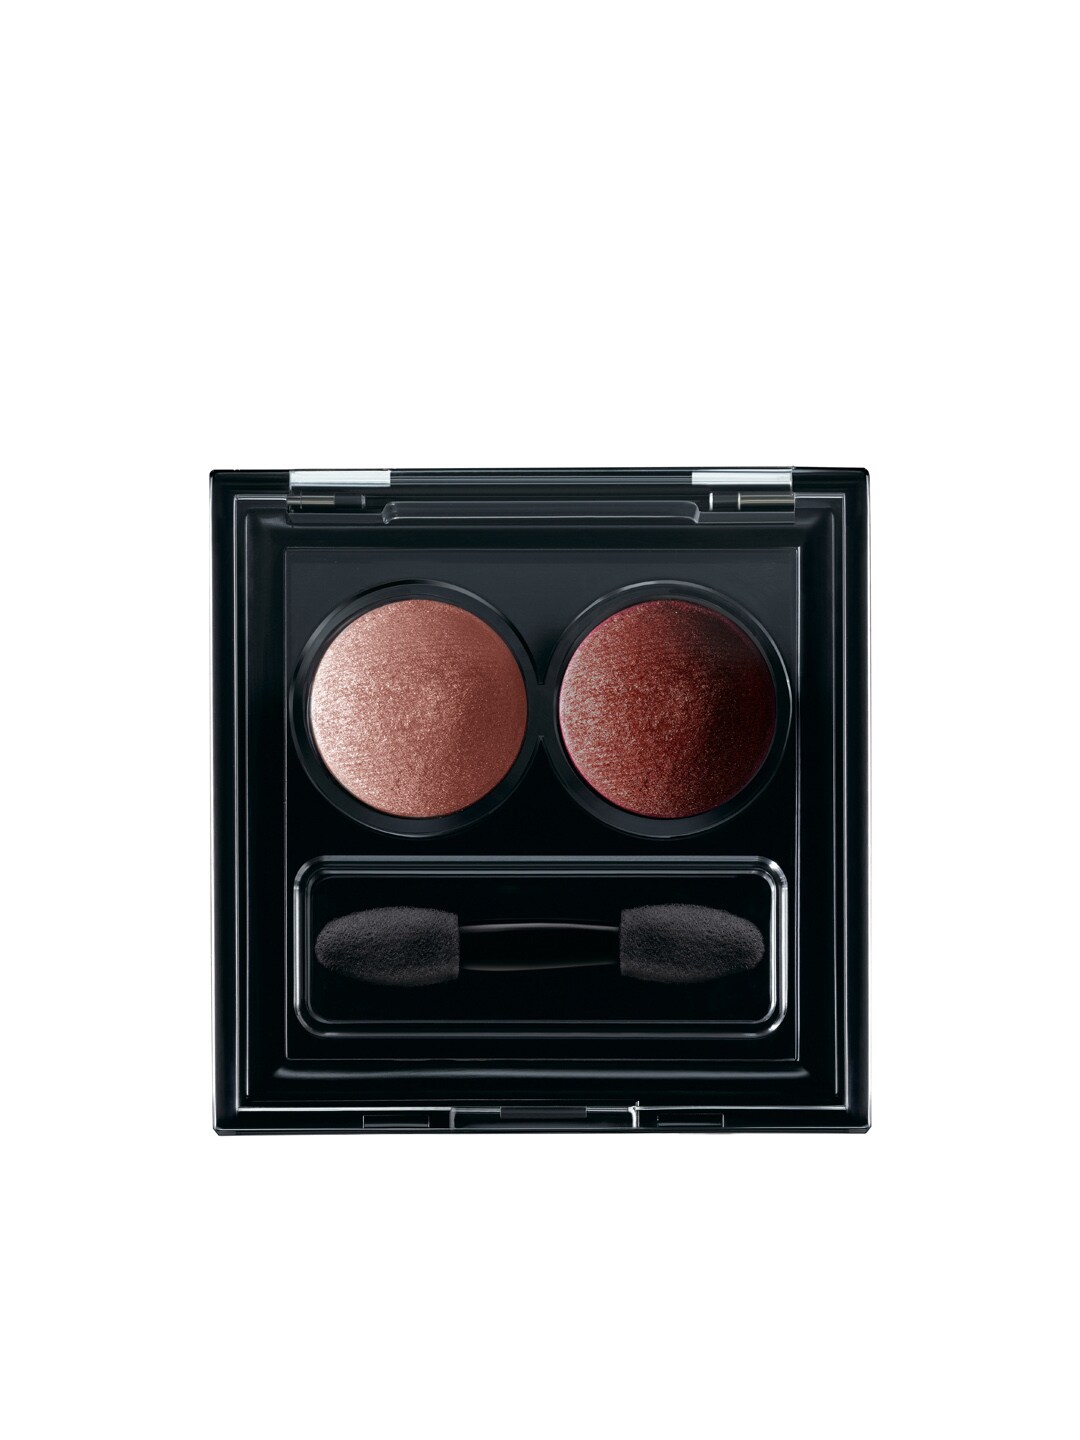 Lakme Absolute Eye Chromatic Day Shimmer Baked Eye Shadow